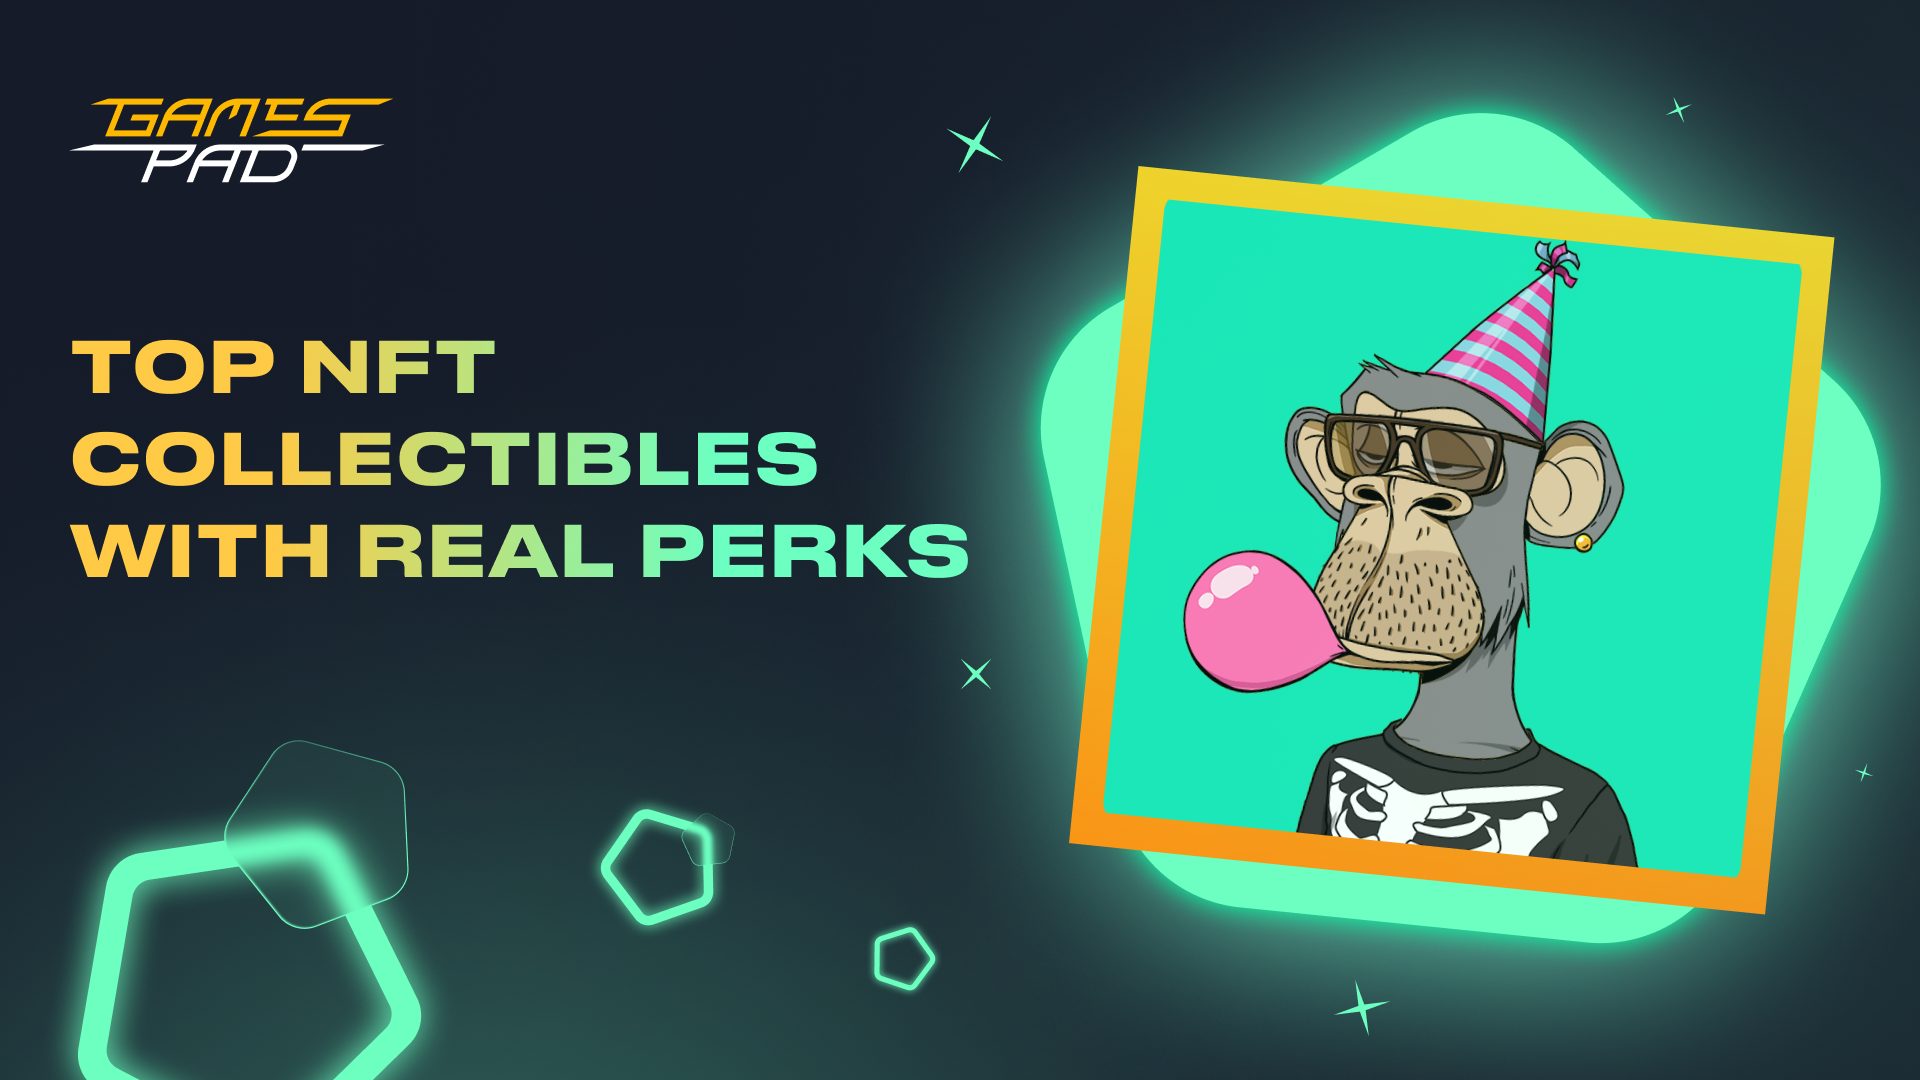 Top NFT Collectibles With Real Perks